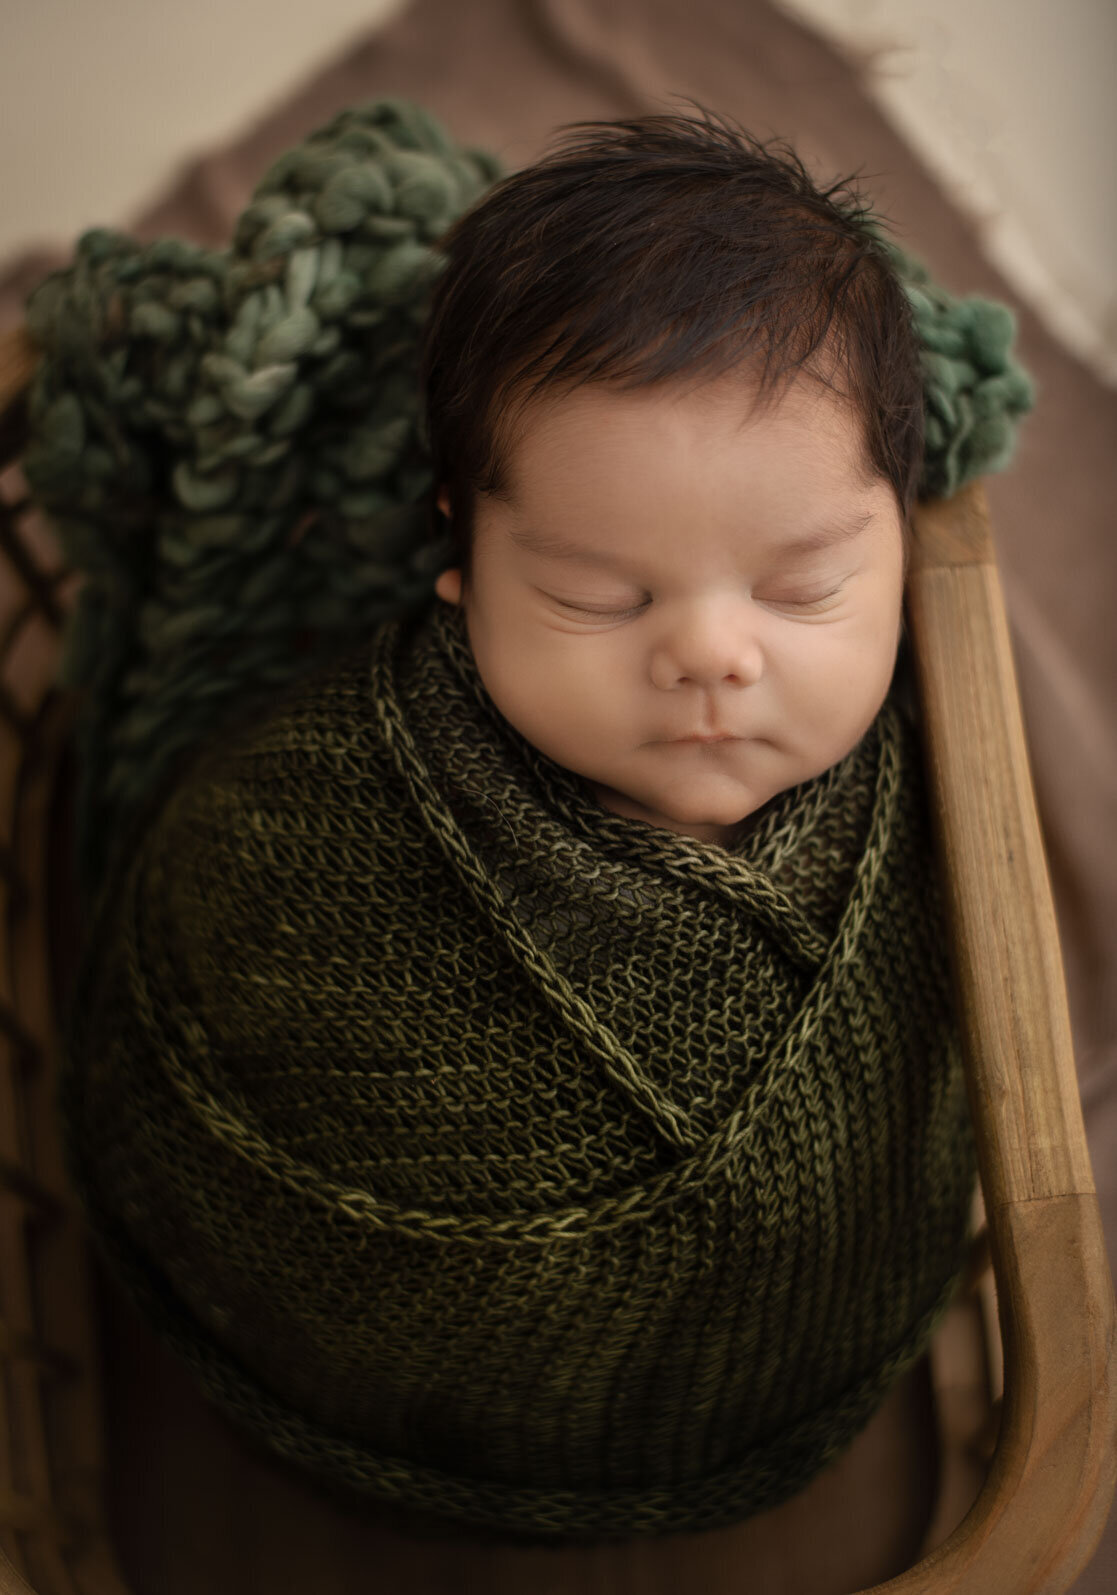 baby wrapped in green with green blanket under head in a newborn basket prop